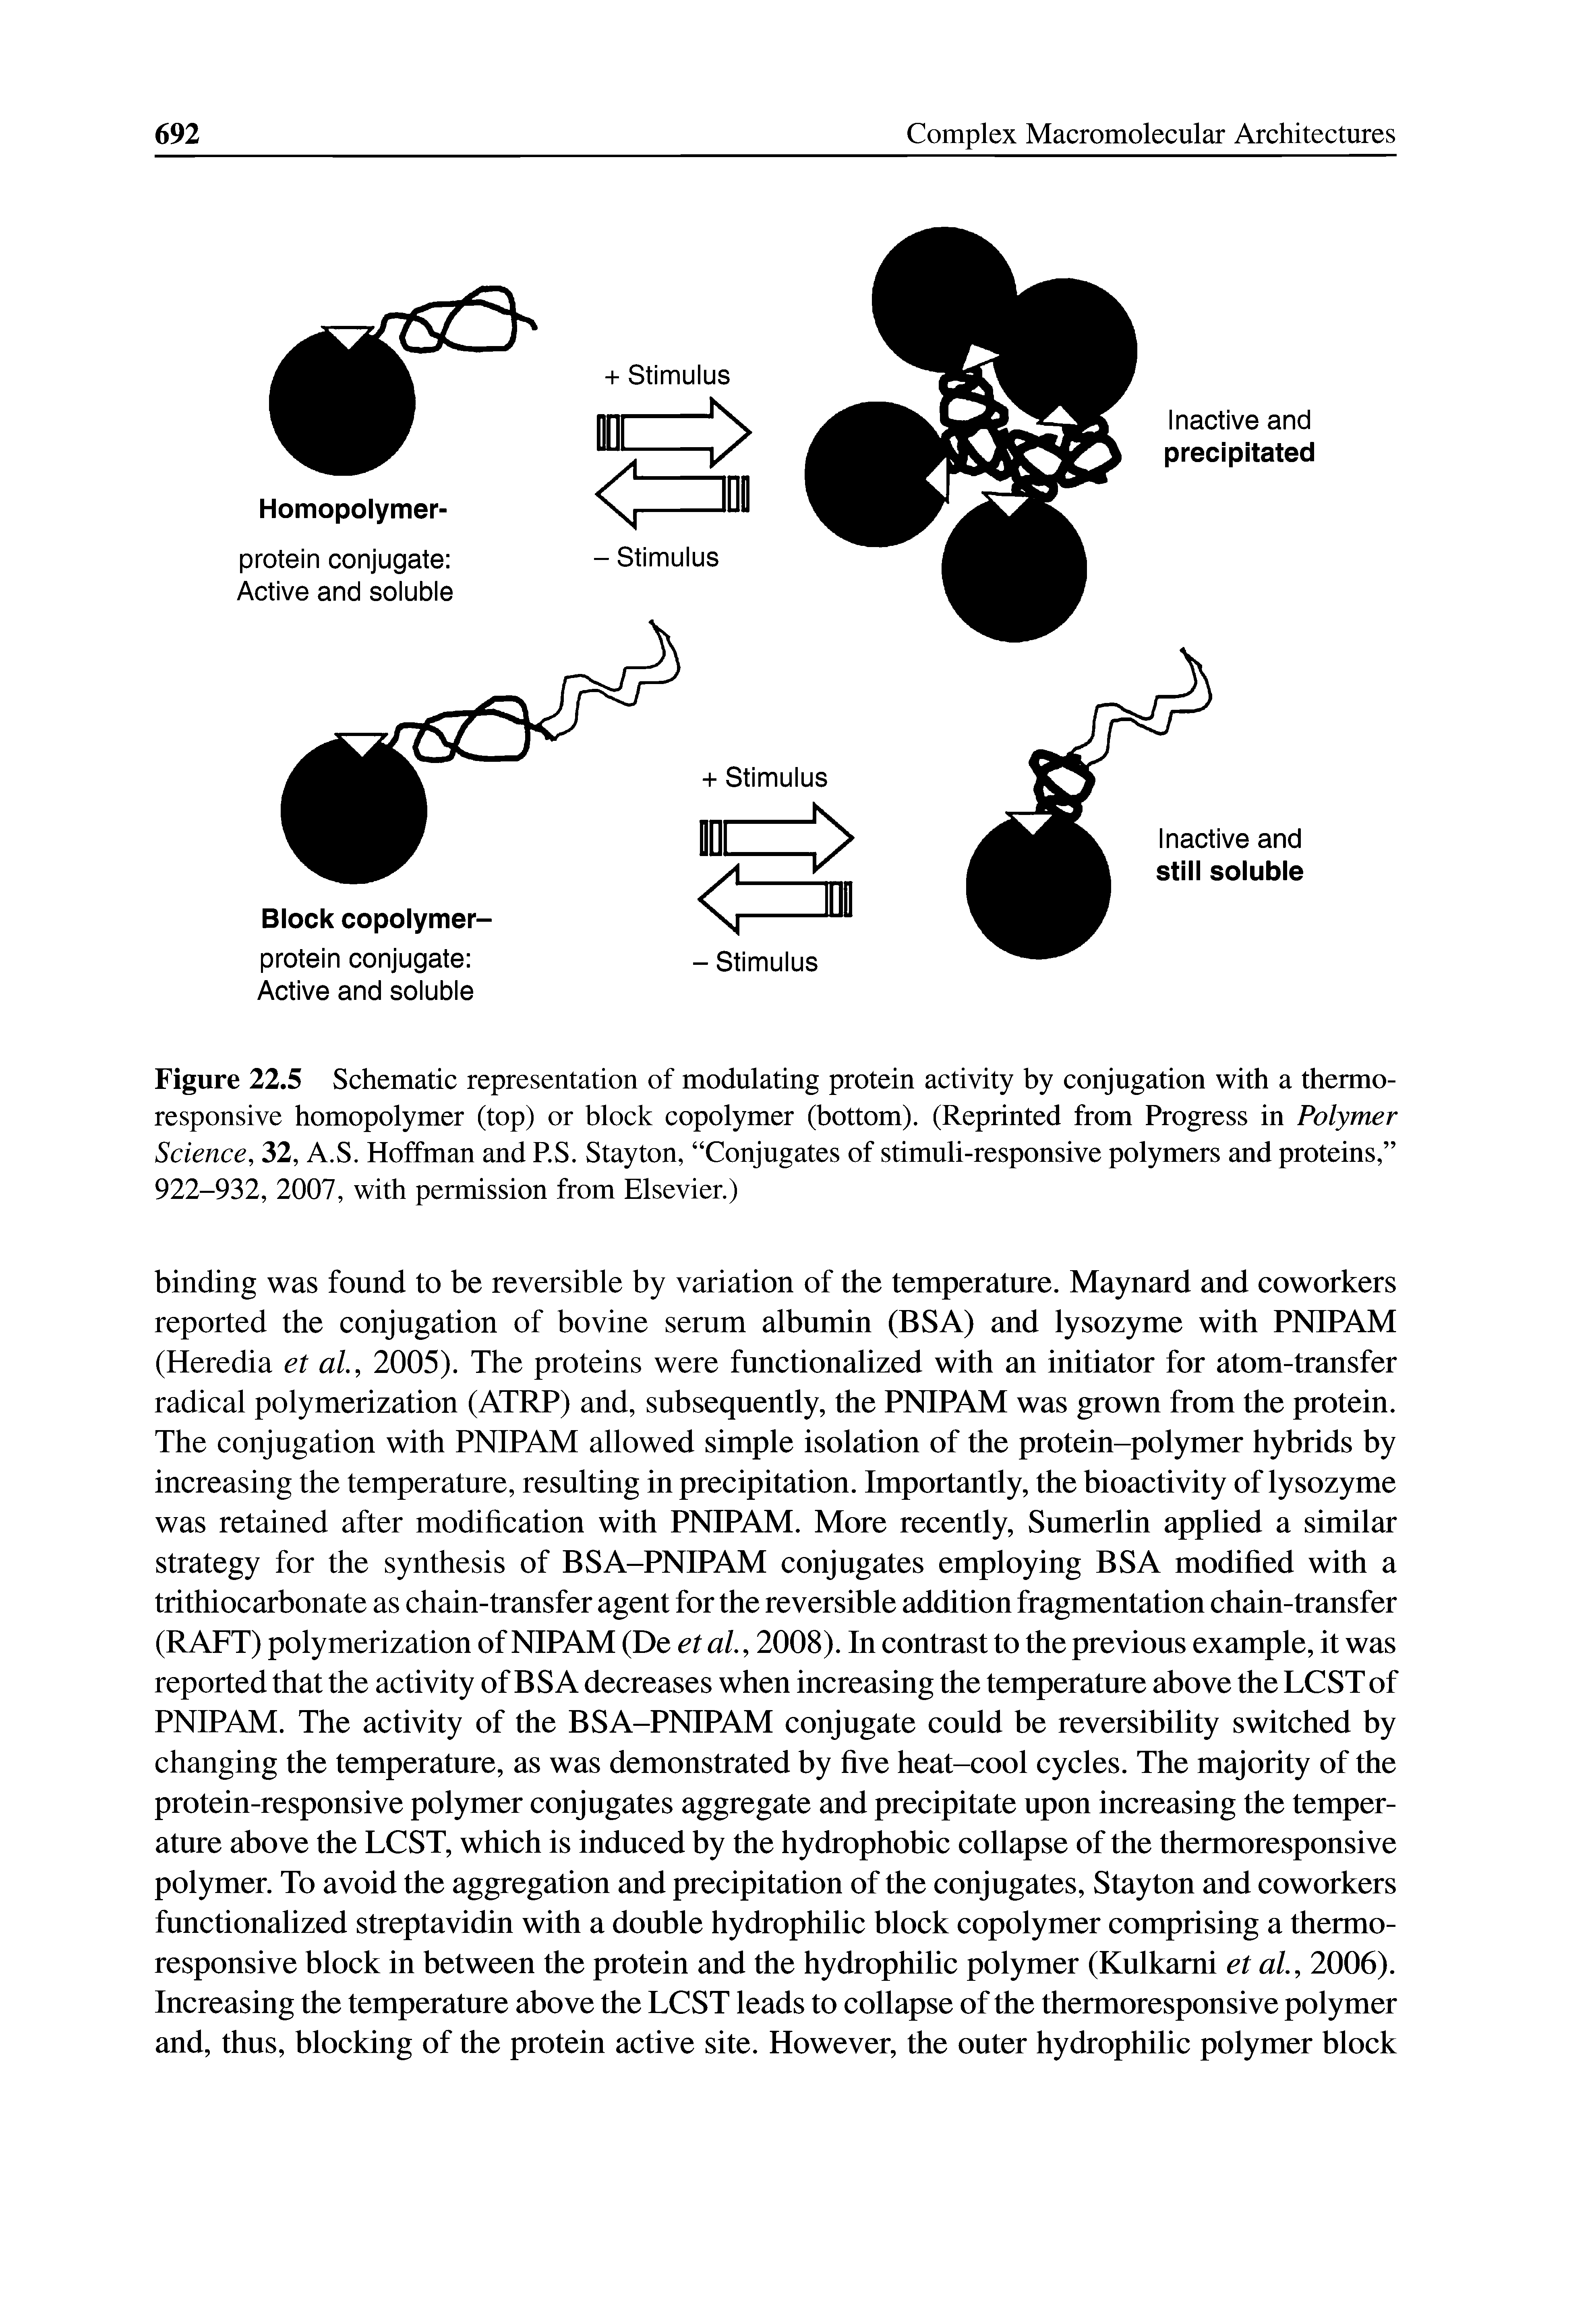 Figure 22.5 Schematic representation of modulating protein activity by conjugation with a thermo-responsive homopolymer (top) or block copolymer (bottom). (Reprinted from Progress in Polymer Science, 32, A.S. Hoffman and P.S. Stayton, Conjugates of stimuli-responsive polymers and proteins, 922-932, 2007, with permission from Elsevier.)...